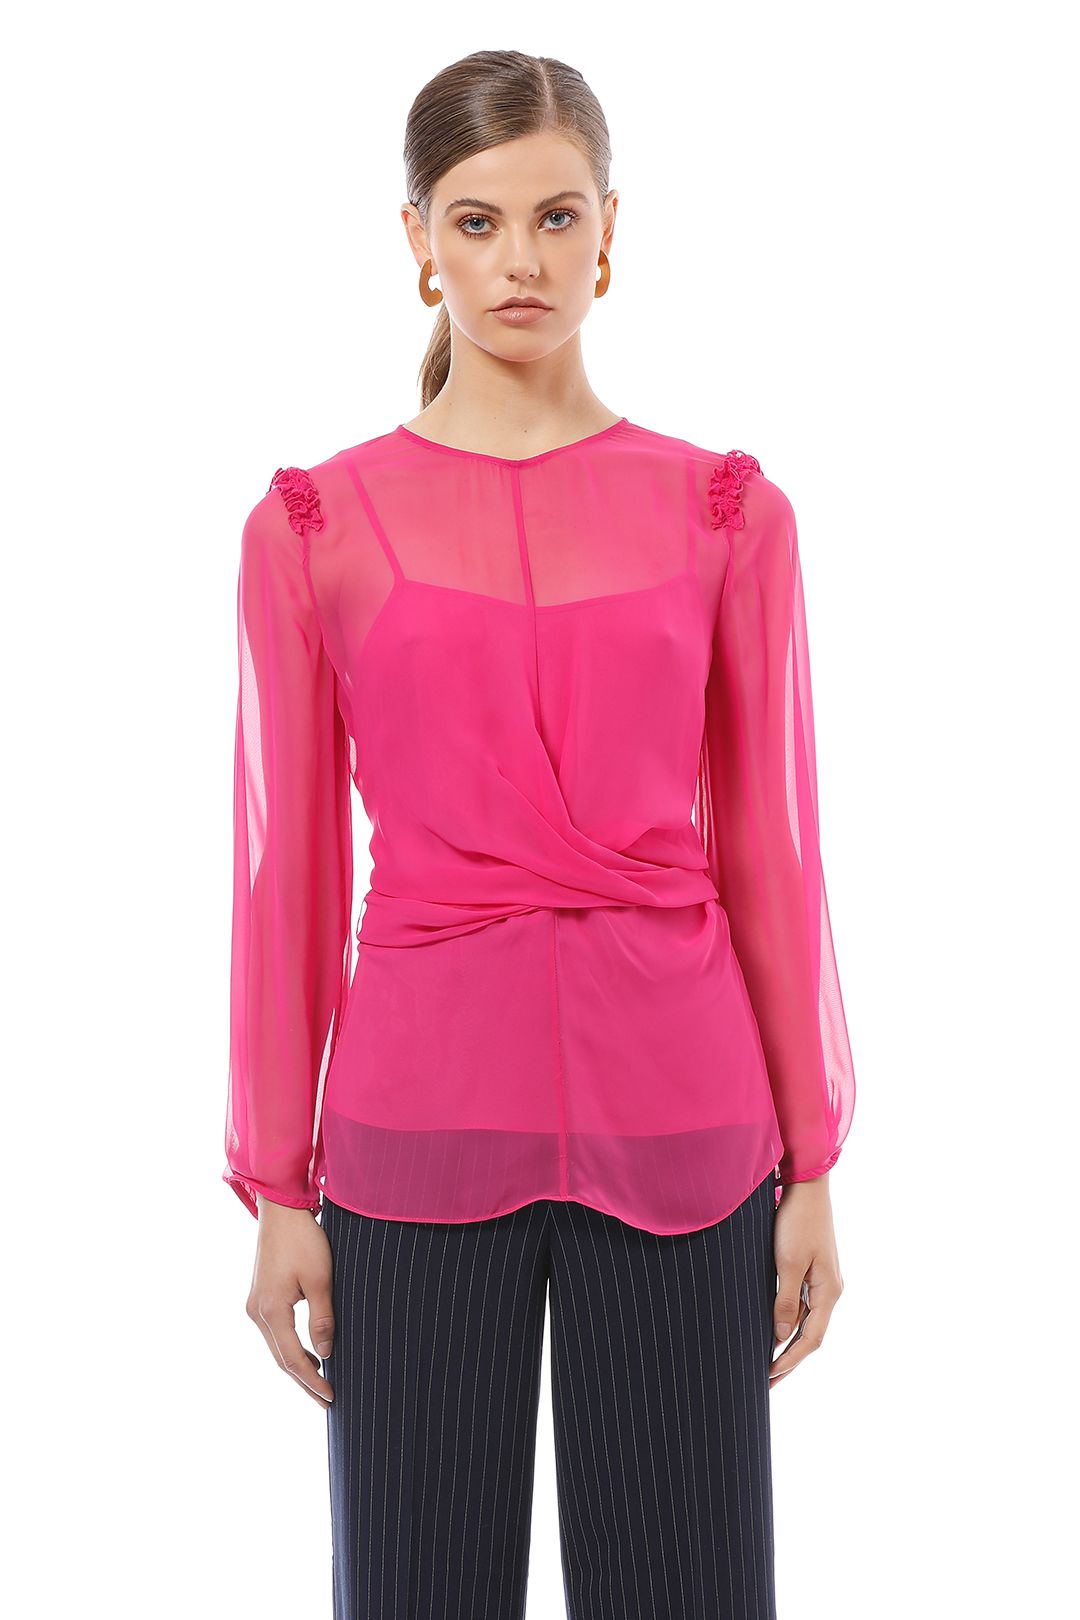 Camilla and Marc - Dylan Twist Top - Pink - Front Detail